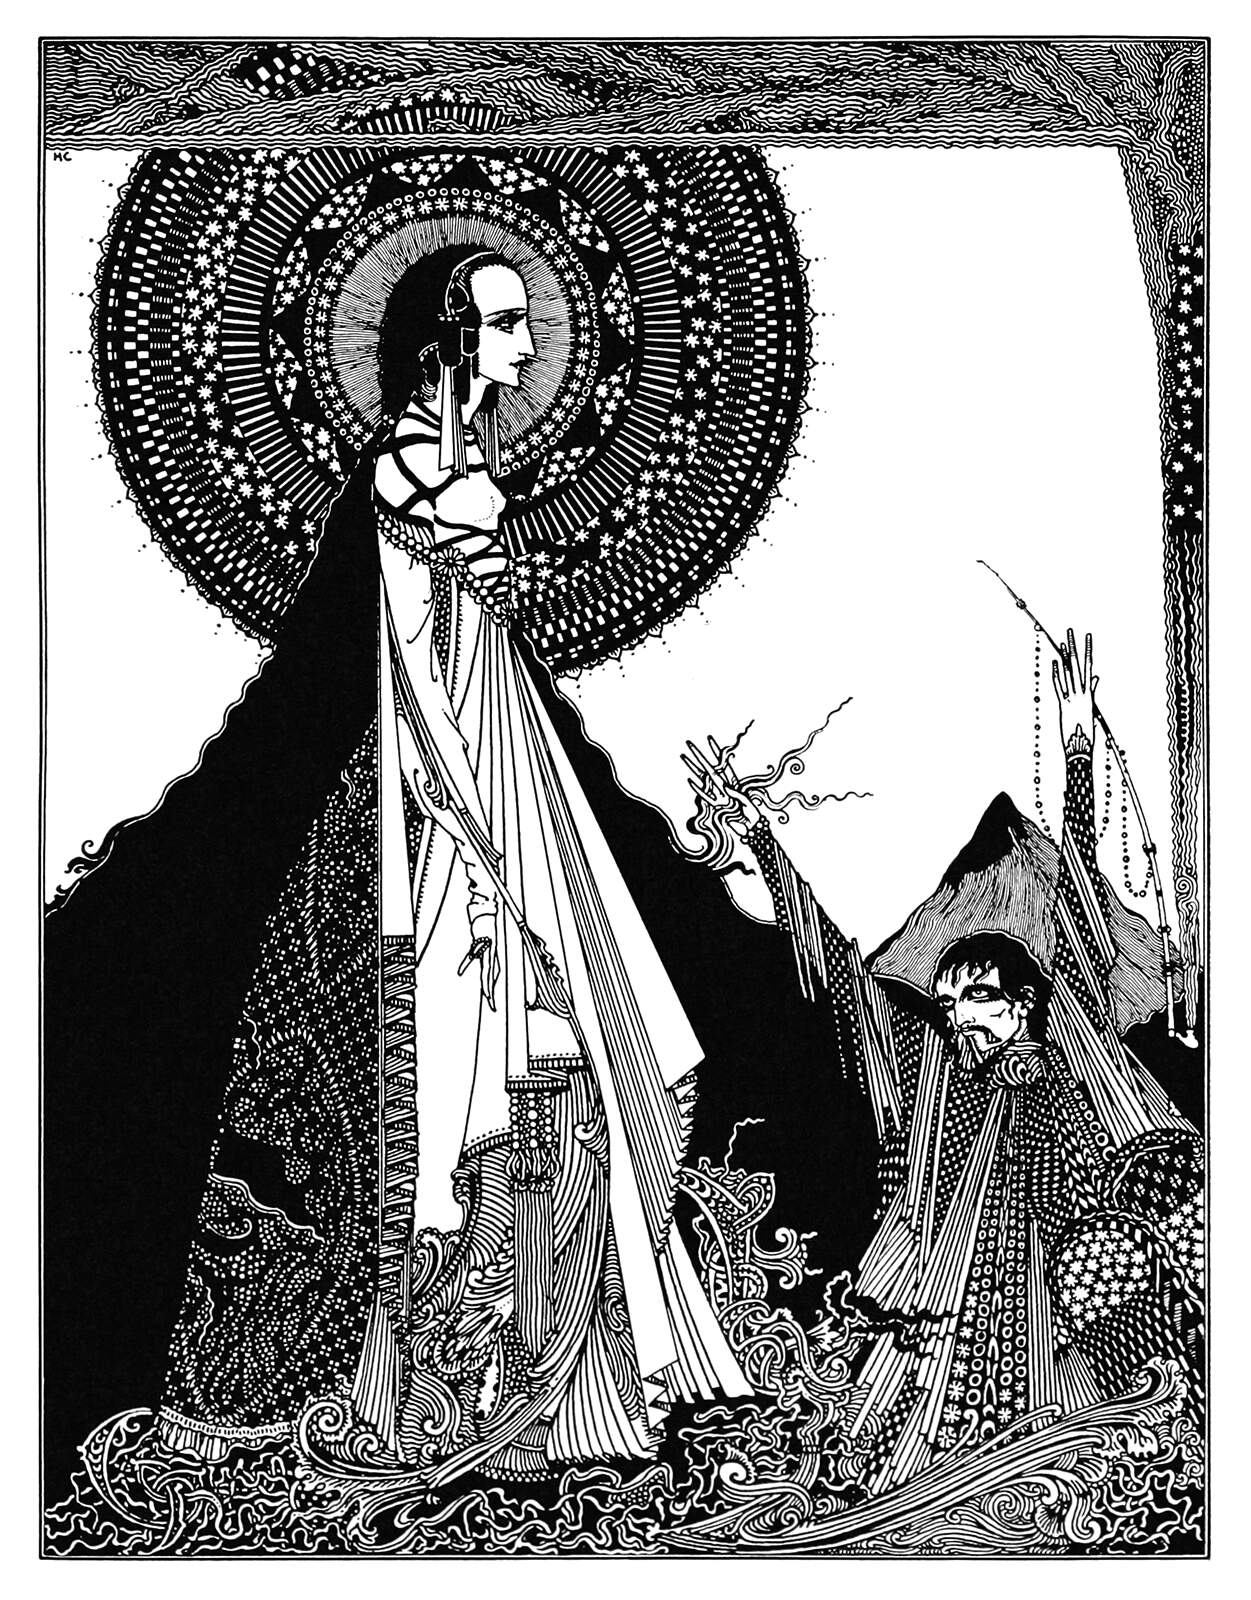 Harry Clarke, I Would Call Aloud from Edgar Allan Poe, Tales of Mystery and Imagination, George G. Harrap and Co., London, 1919, p. 110. Public Domain Review.